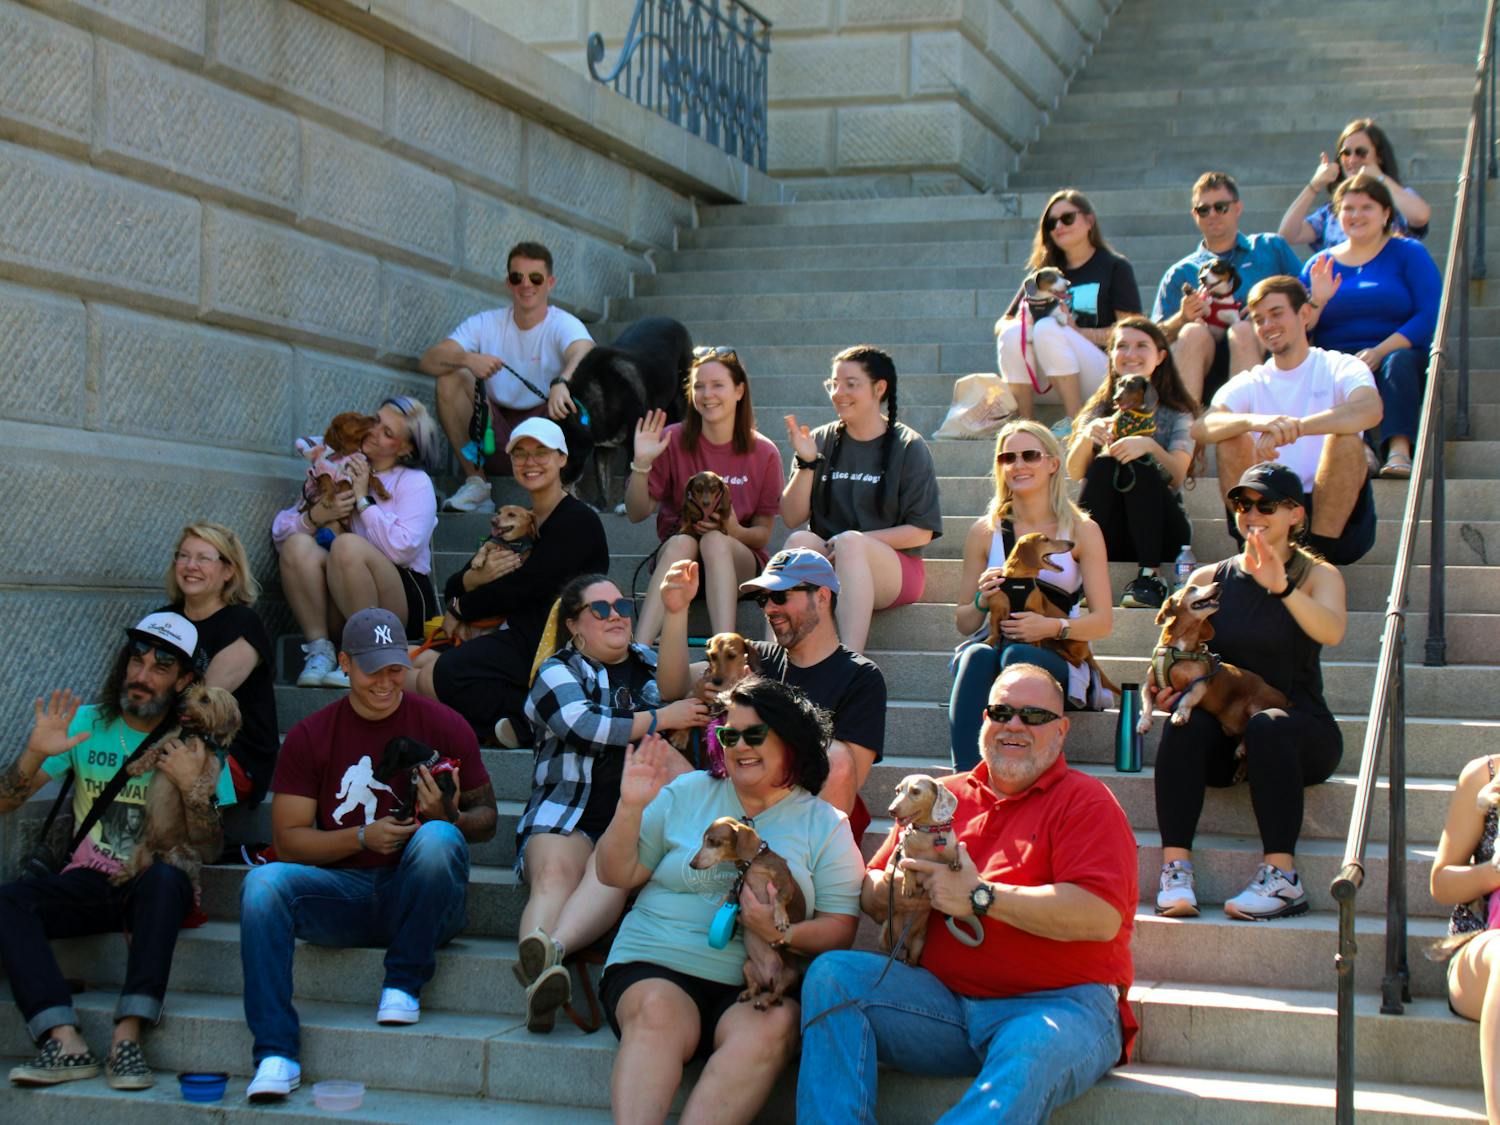 The Dachshunds of Columbia dog walking group gathers along the steps of the Statehouse with their dogs for a group picture on Sept. 17, 2022. The Columbia dog-walking group gathered with their furry friends for a walk from USC's Horseshoe to the S.C. Statehouse.